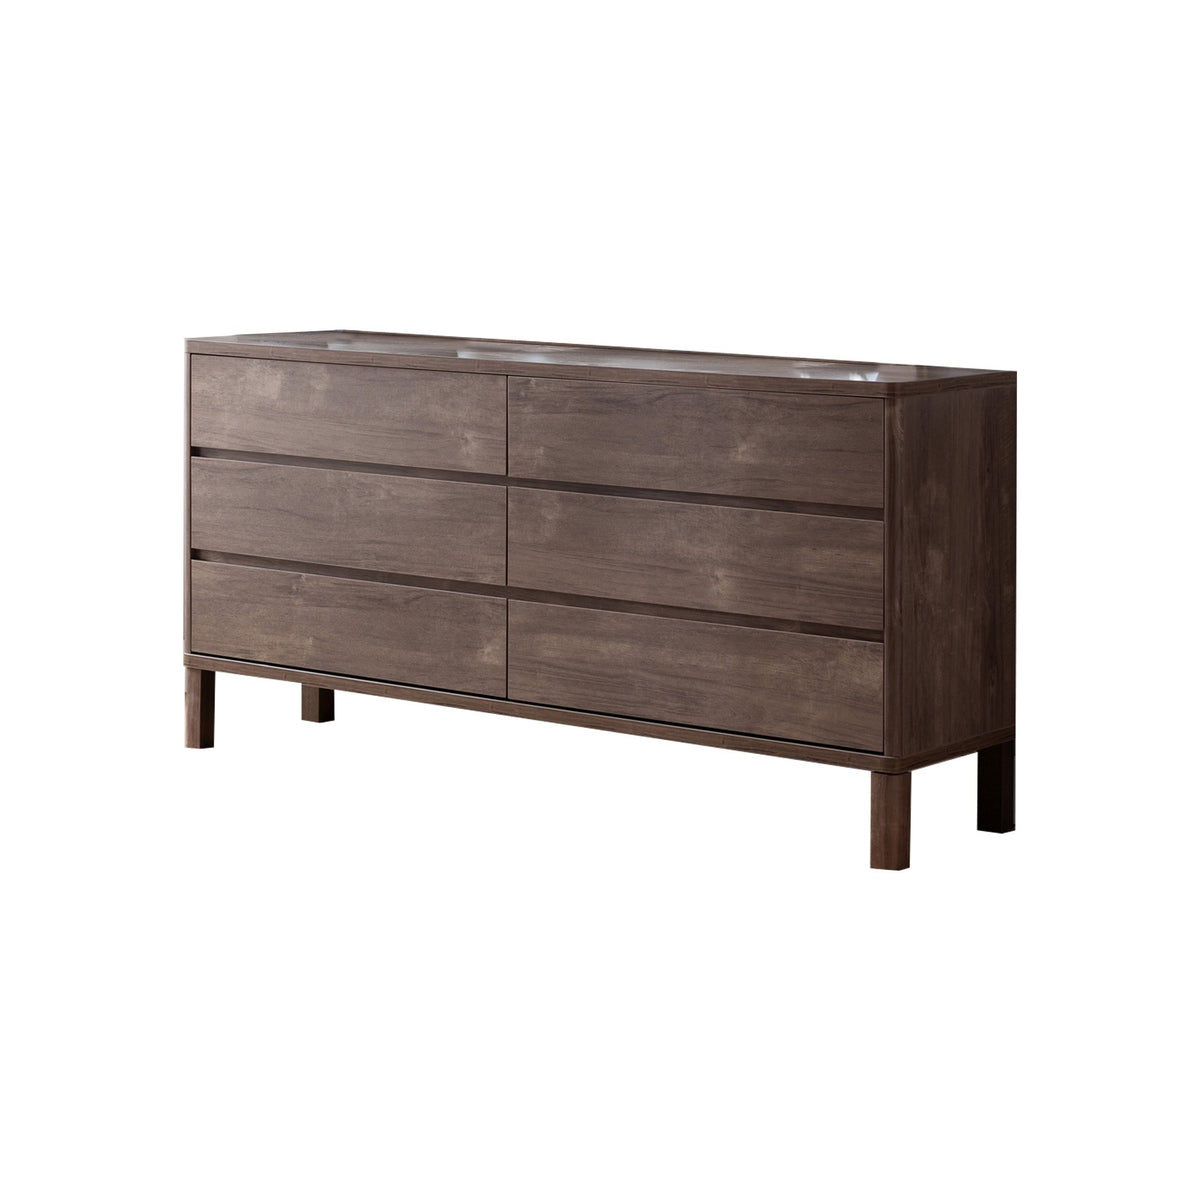 Wooden Frame Dresser with 6 Drawers and Straight Legs, Hazelnut Brown - BM214687